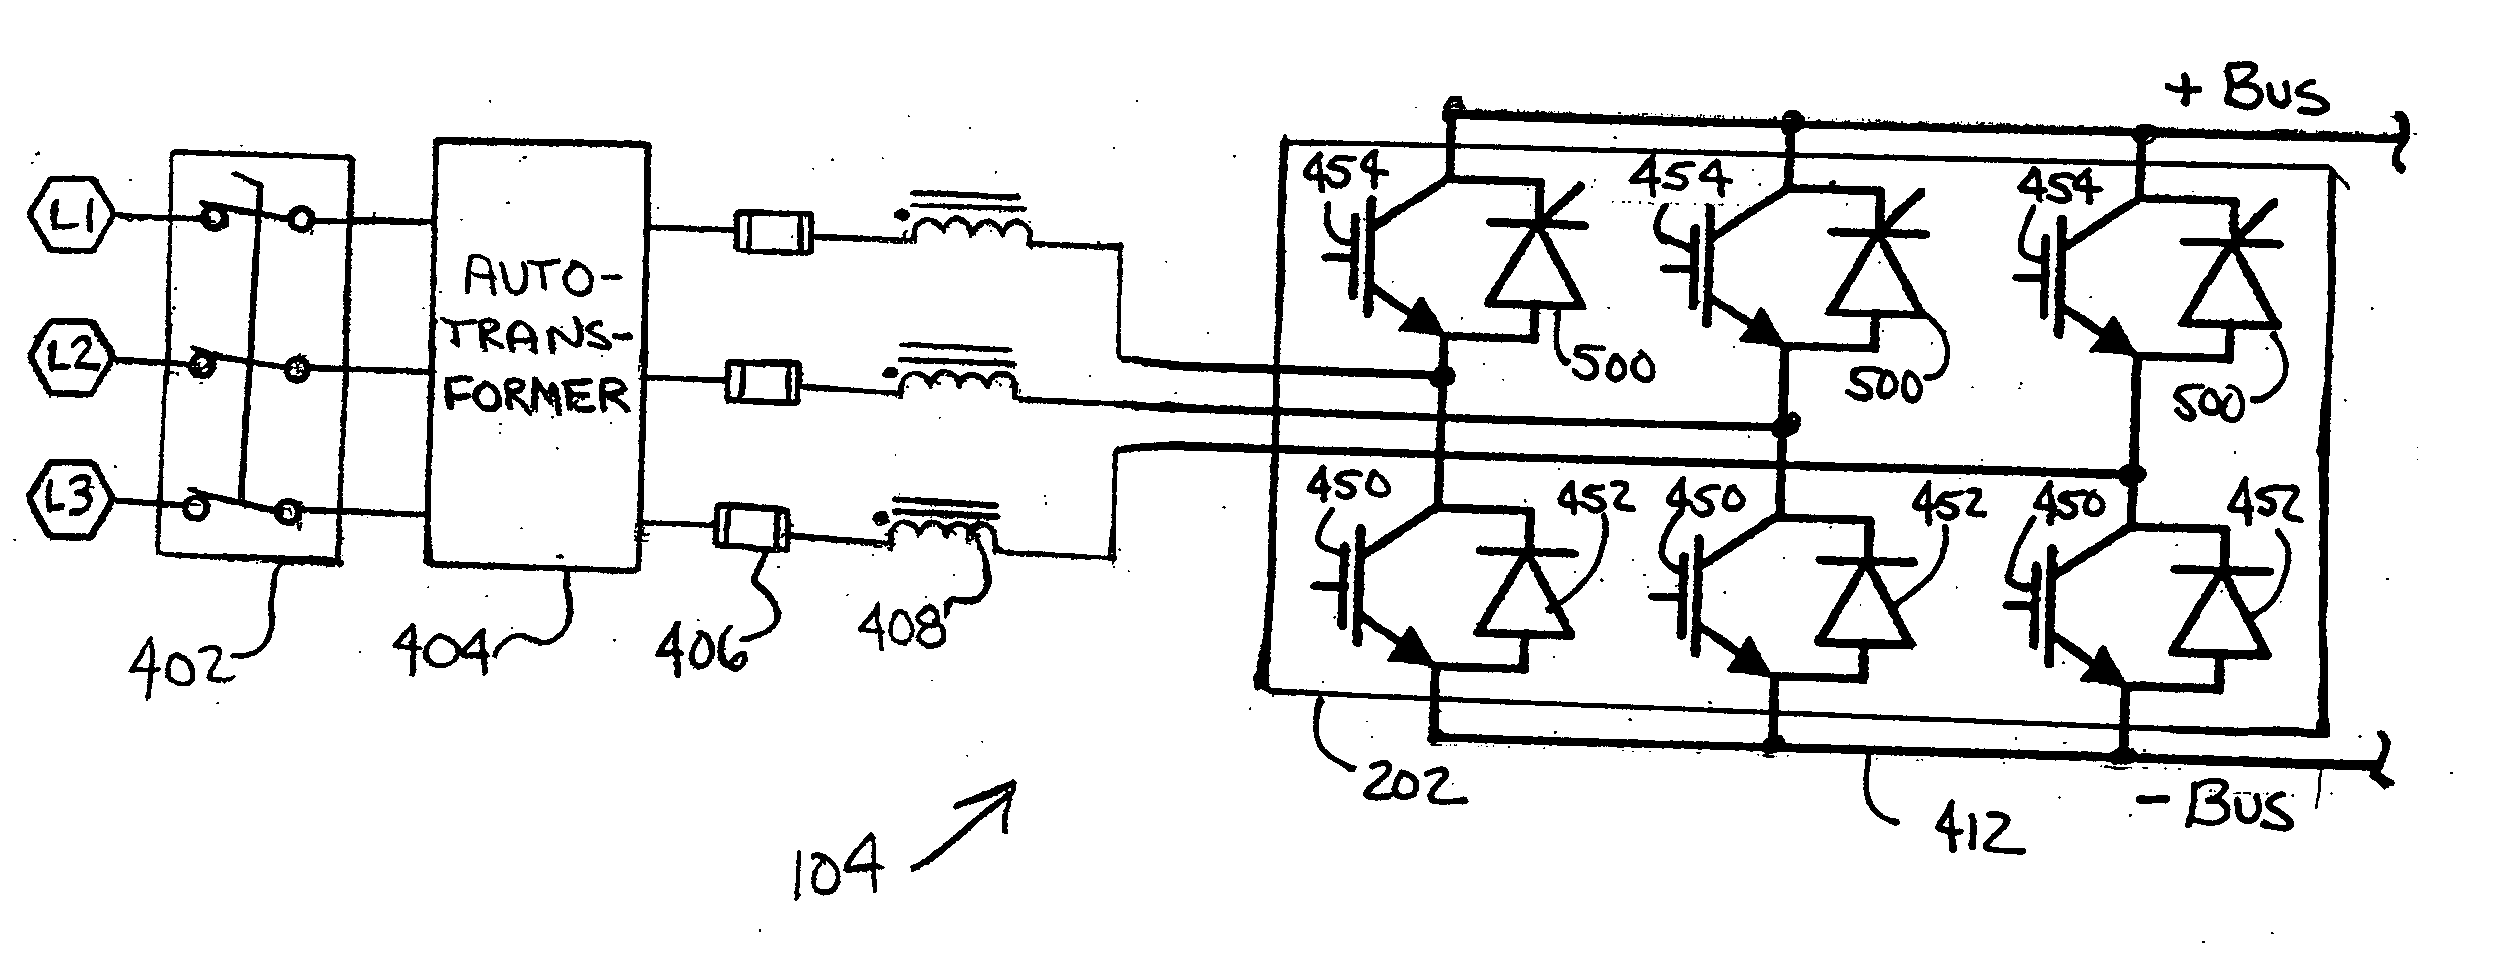 System for precharging a DC link in a variable speed drive